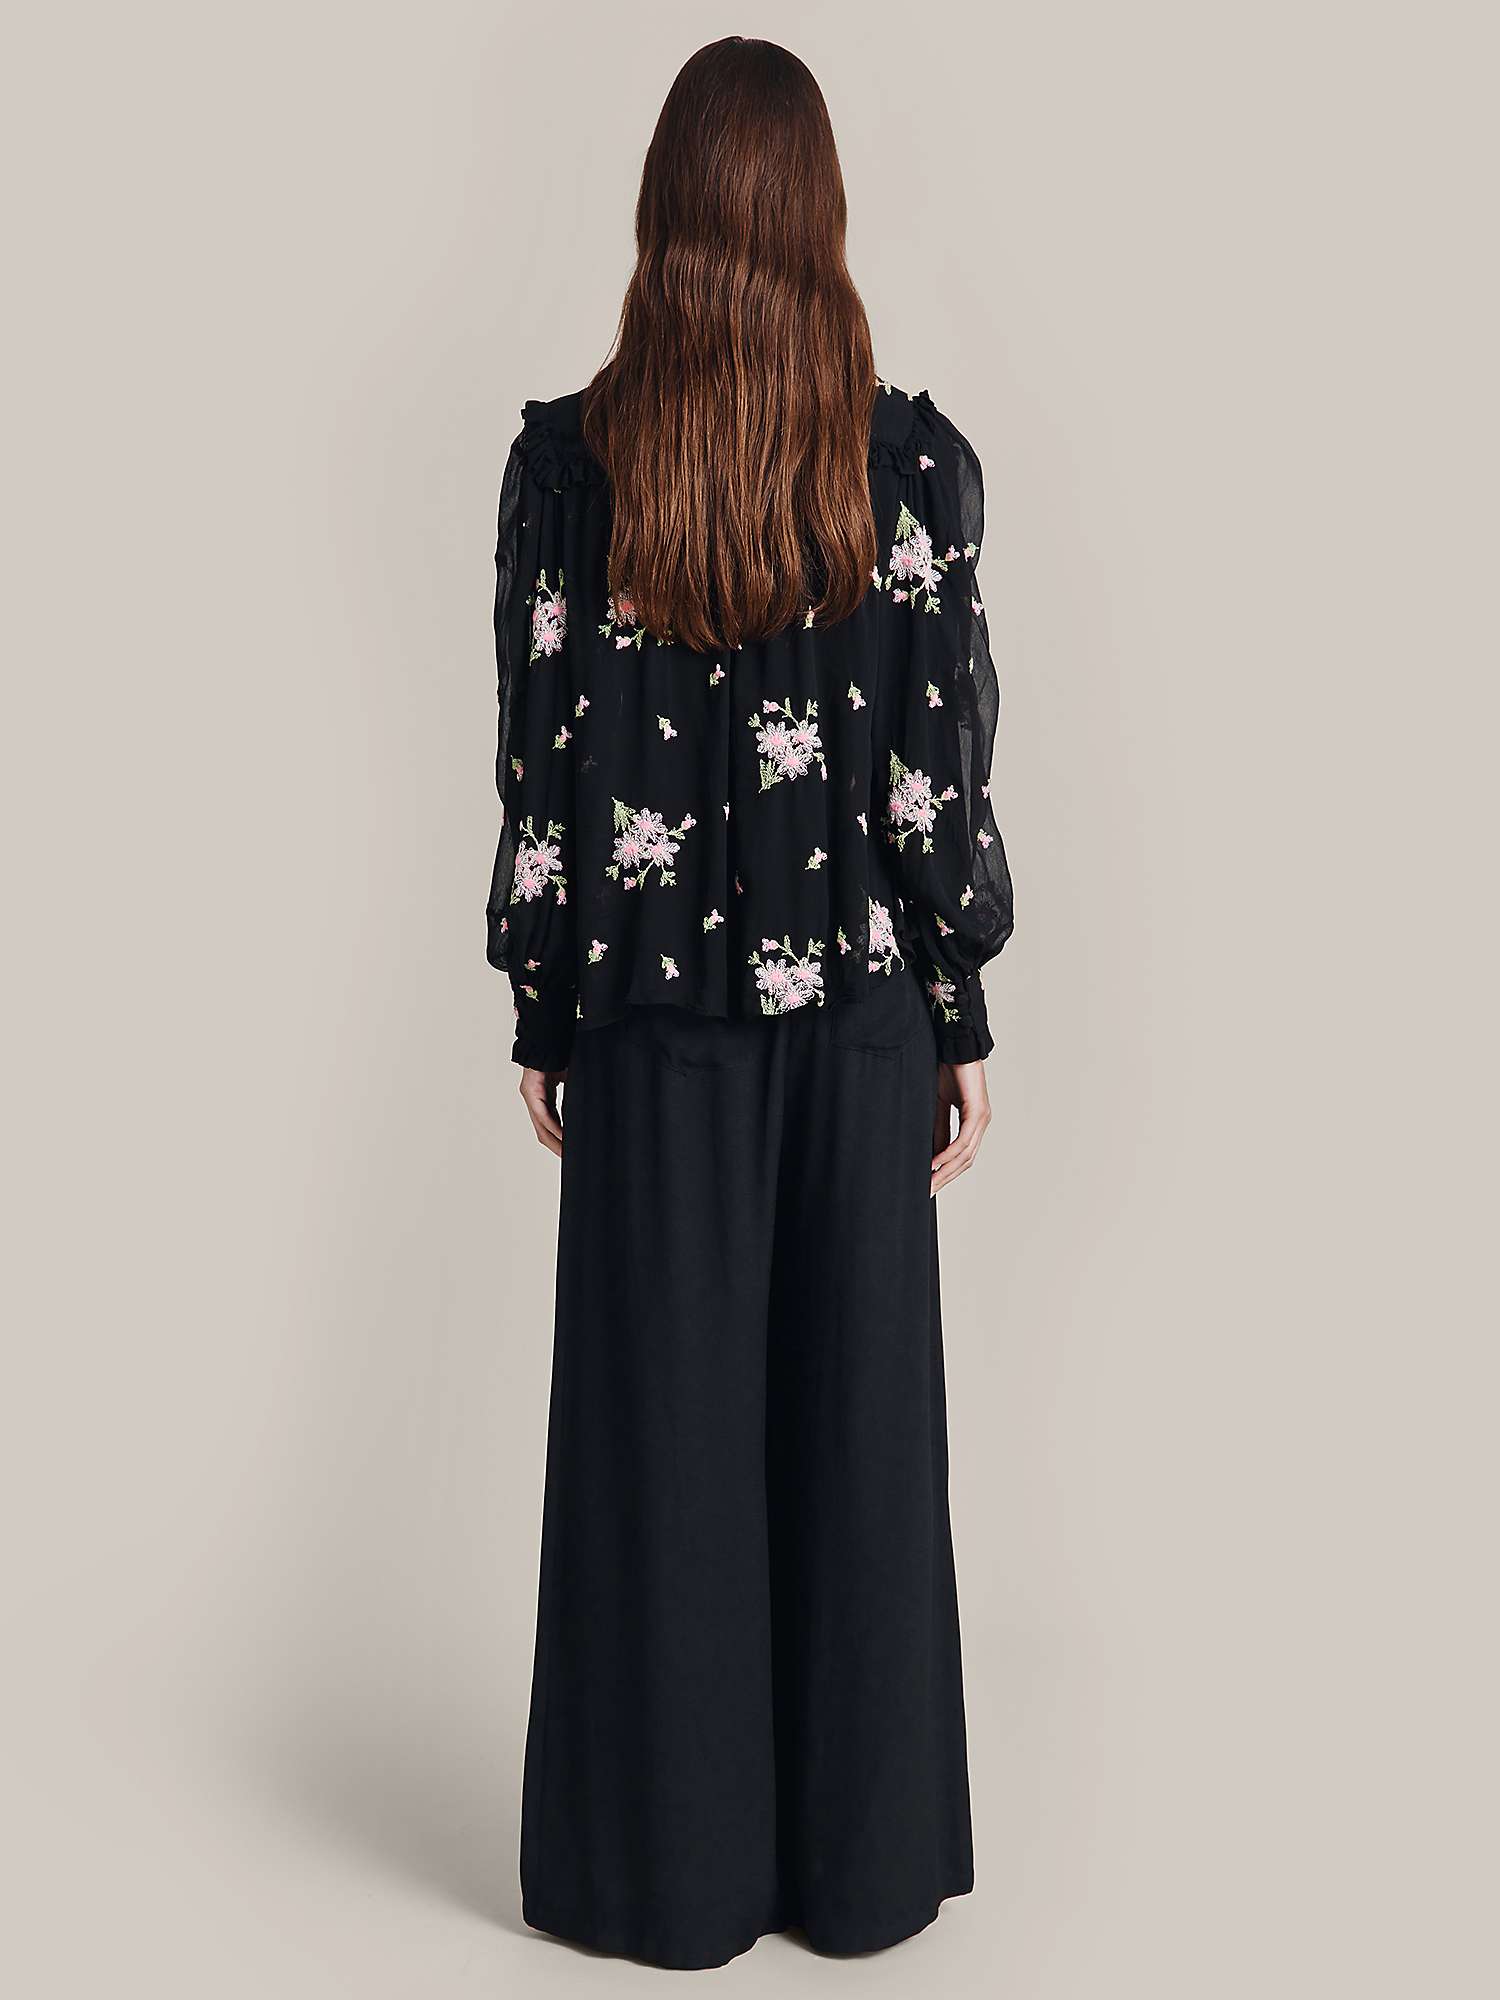 Buy Ghost Clara Satin Palazzo Trousers Online at johnlewis.com